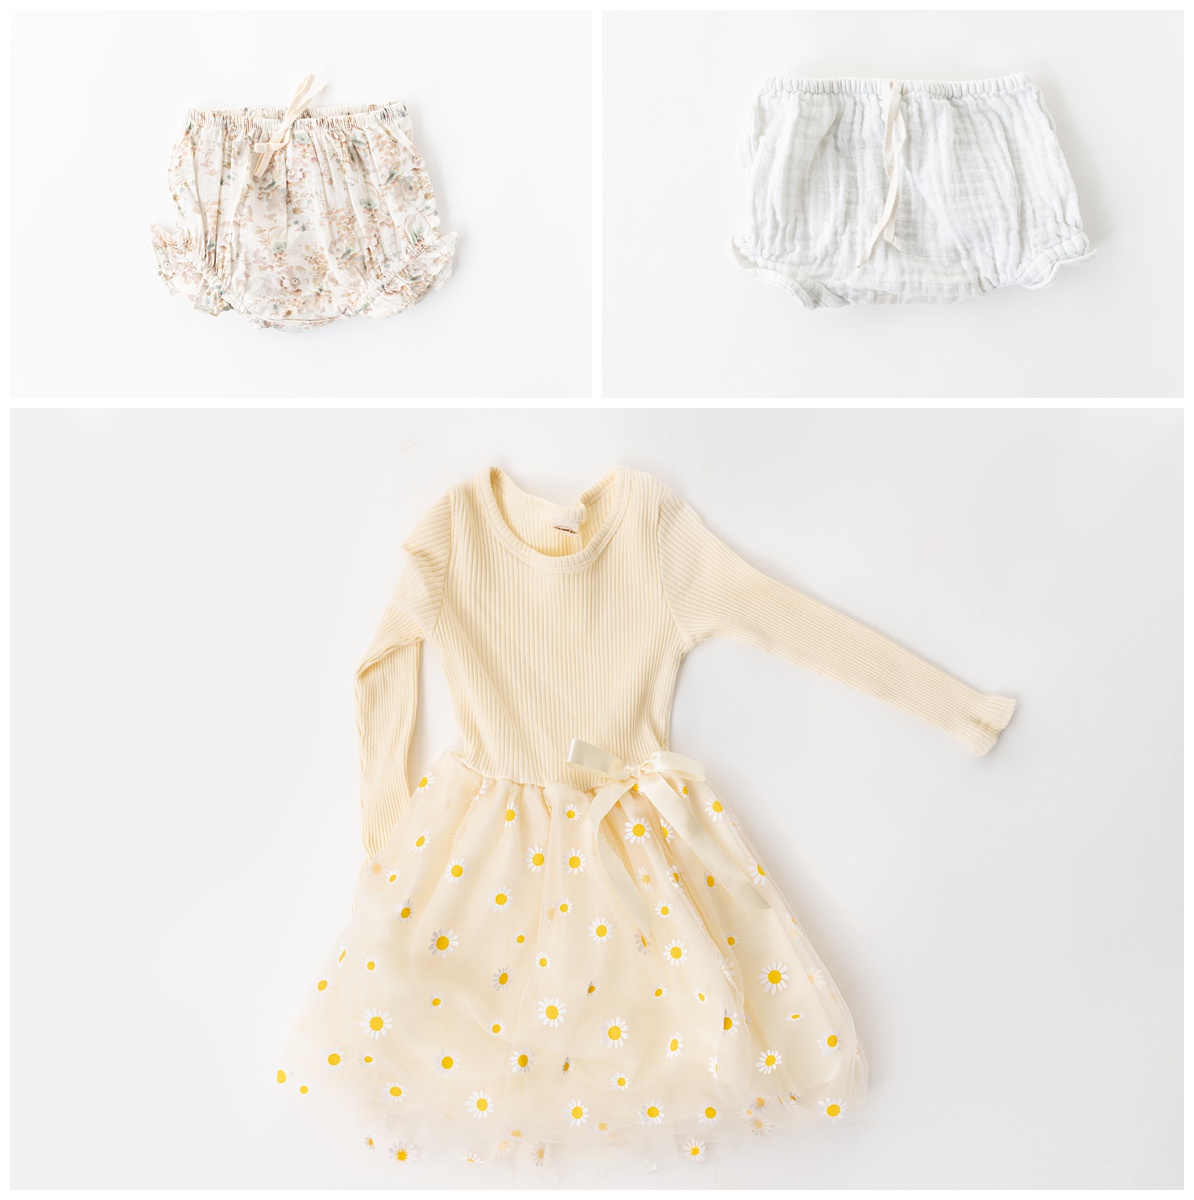 floral diaper covers and sunflower yellow kids dress